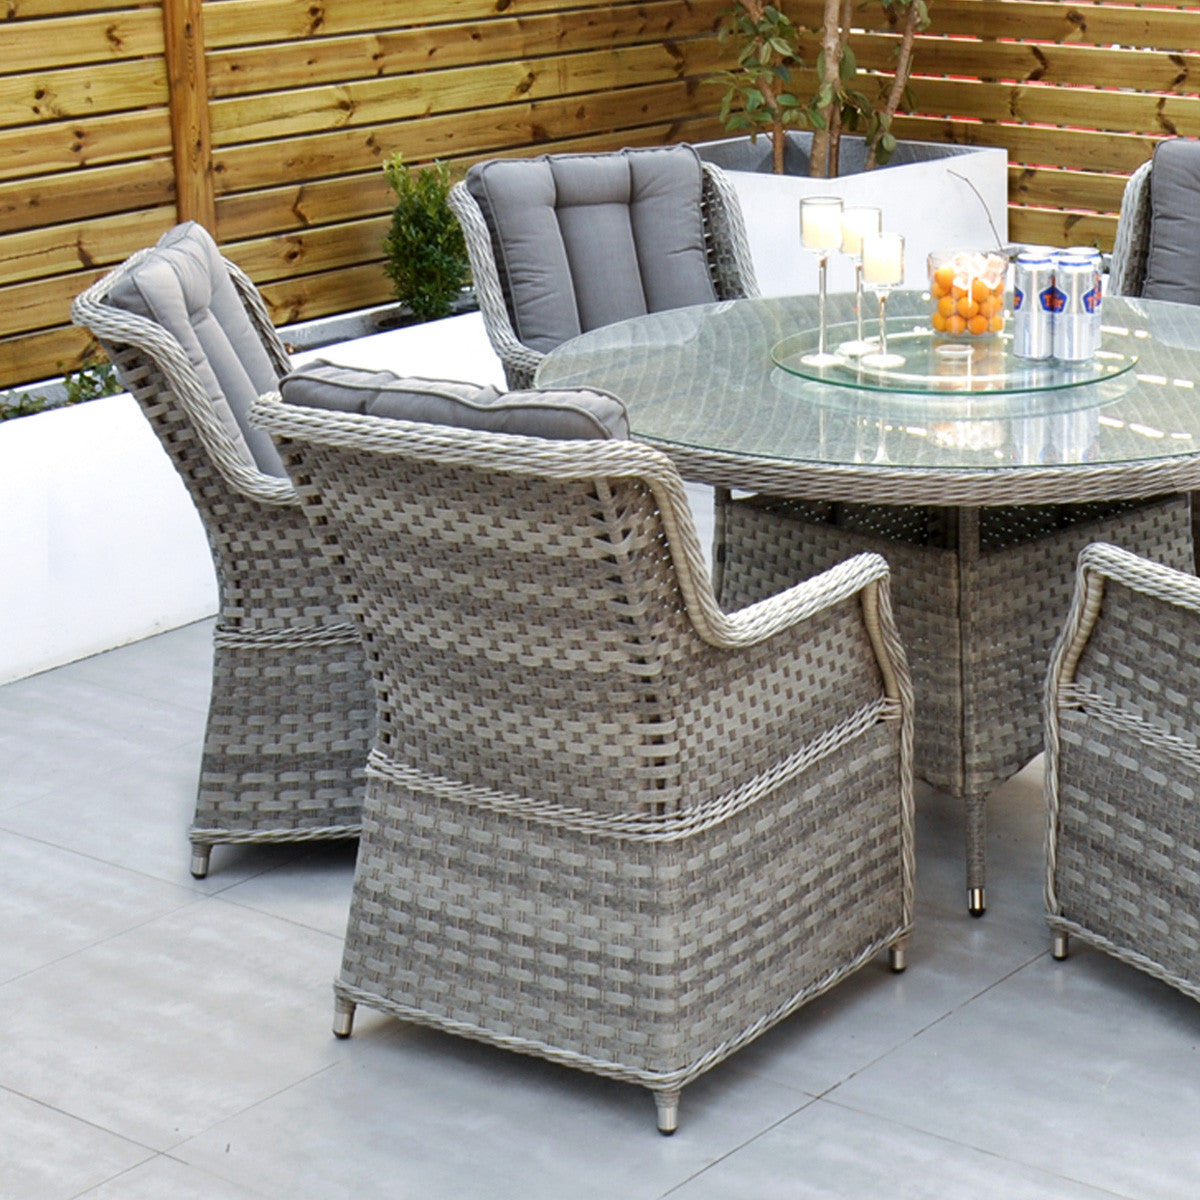 Bali - 6 Seat – with Set Lowneys (Grey) 135cm Table Round